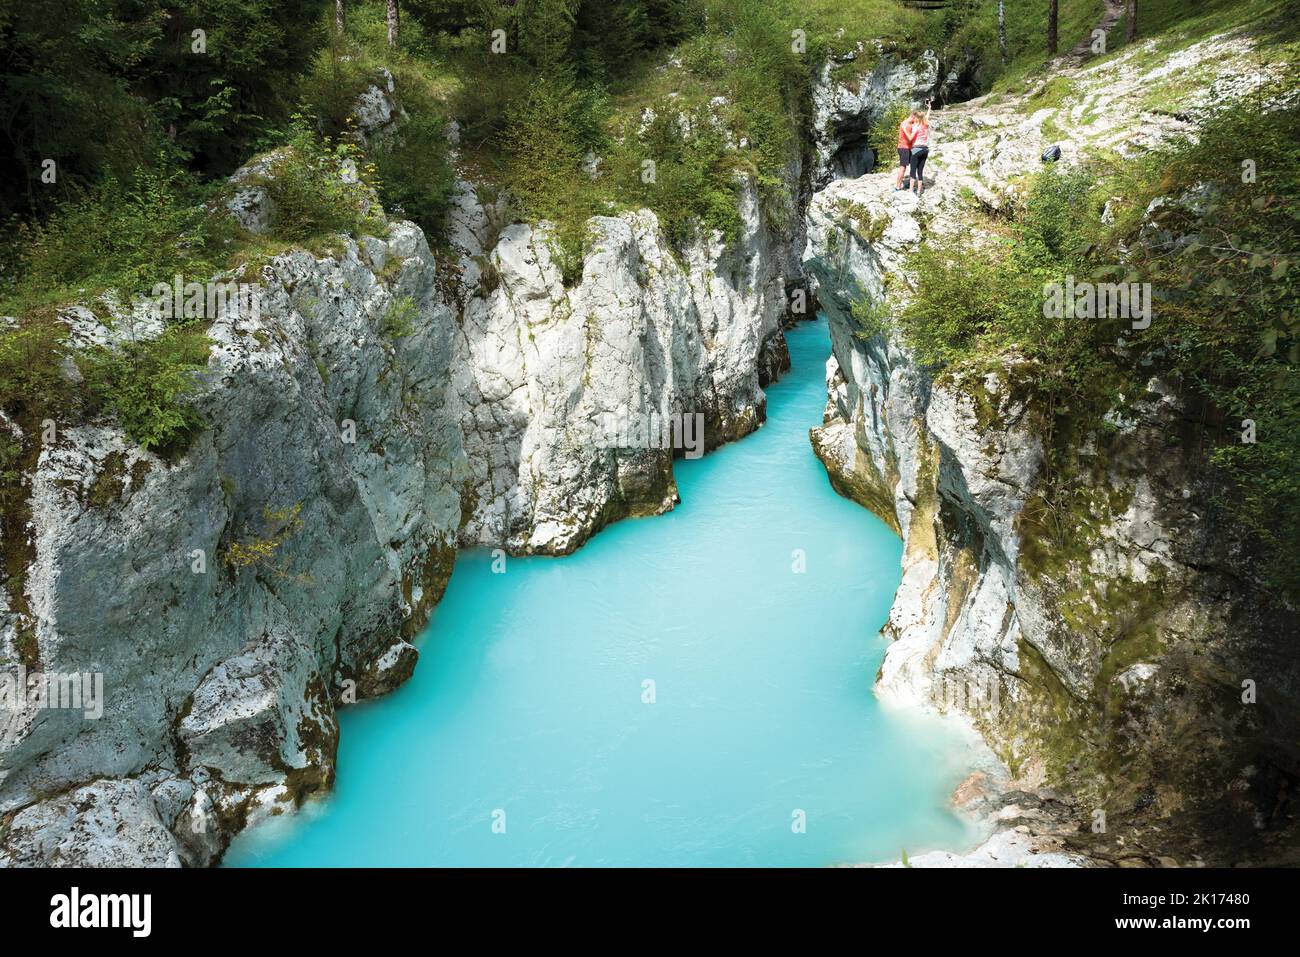 Turquoise river in the mountain gorge Stock Photo